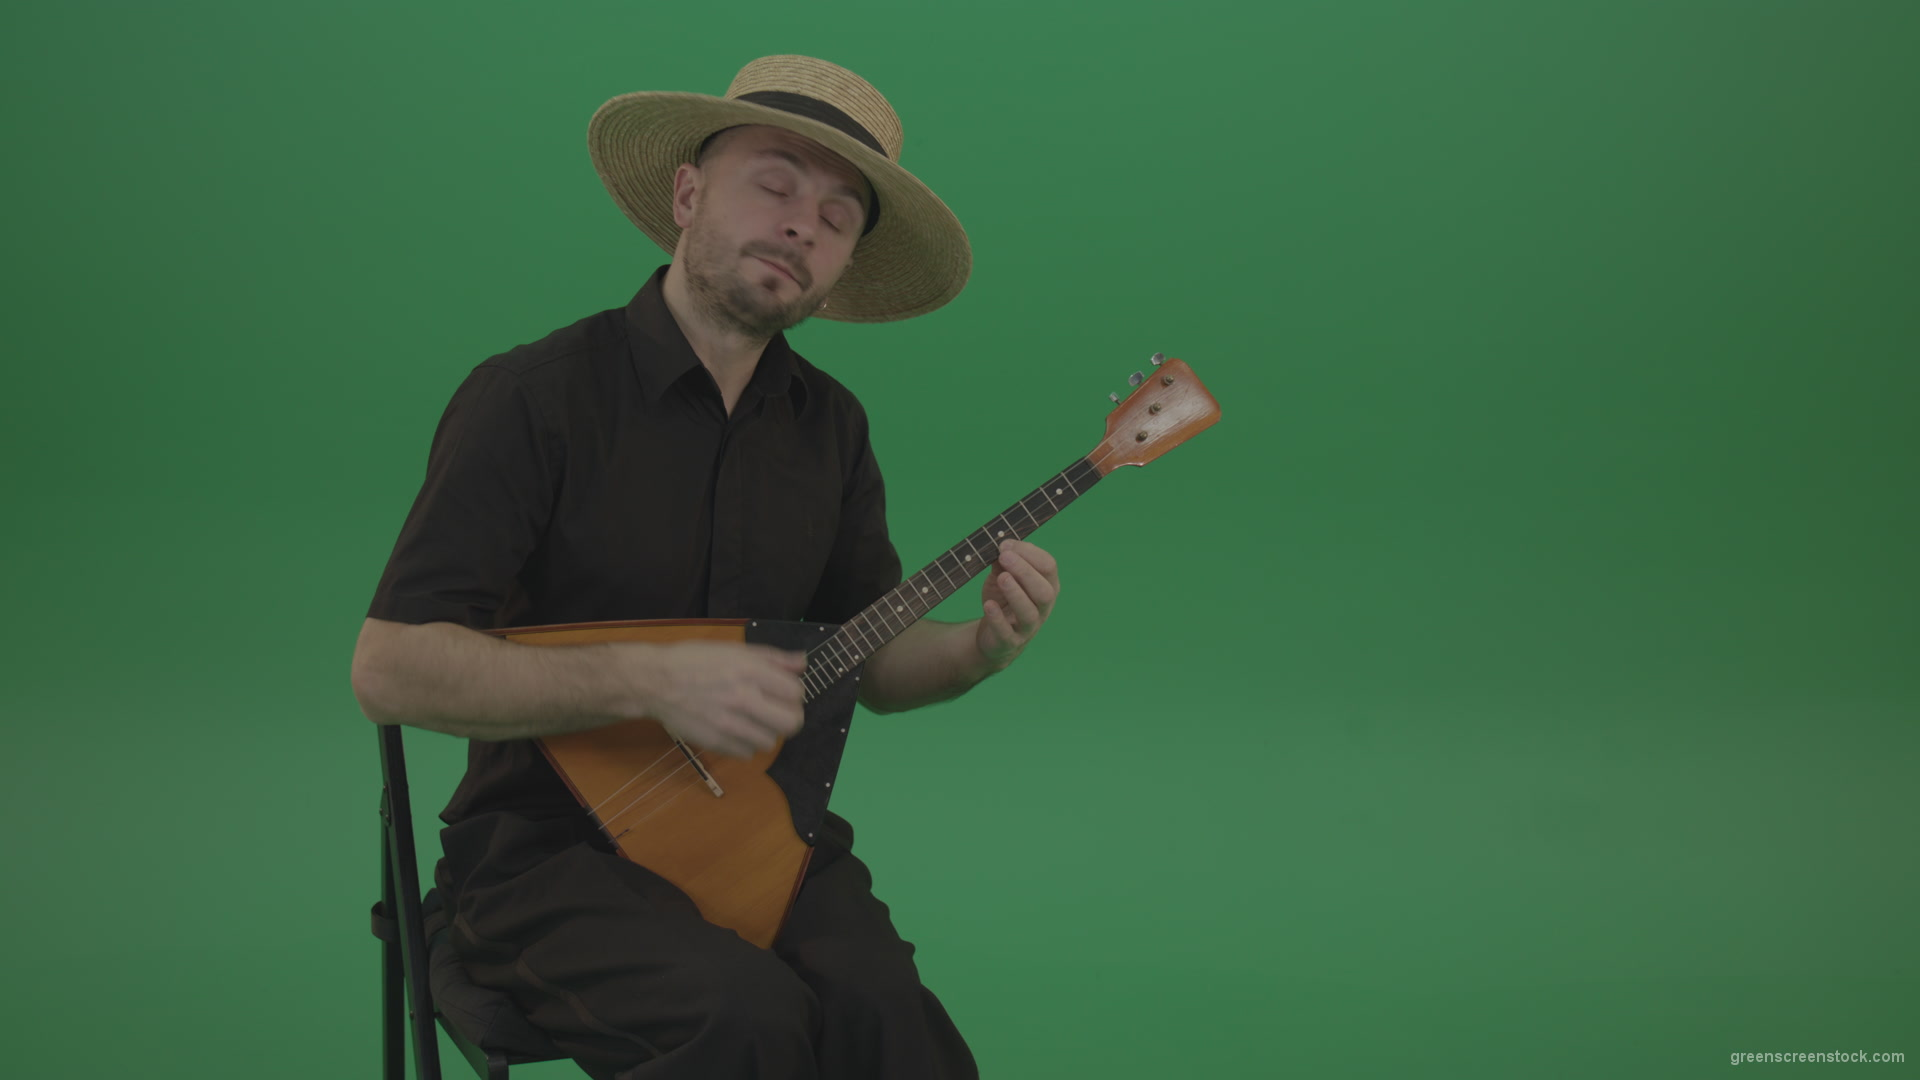 Man-from-village-play-Balalaika-music-instrument-isolated-on-green-screen_002 Green Screen Stock